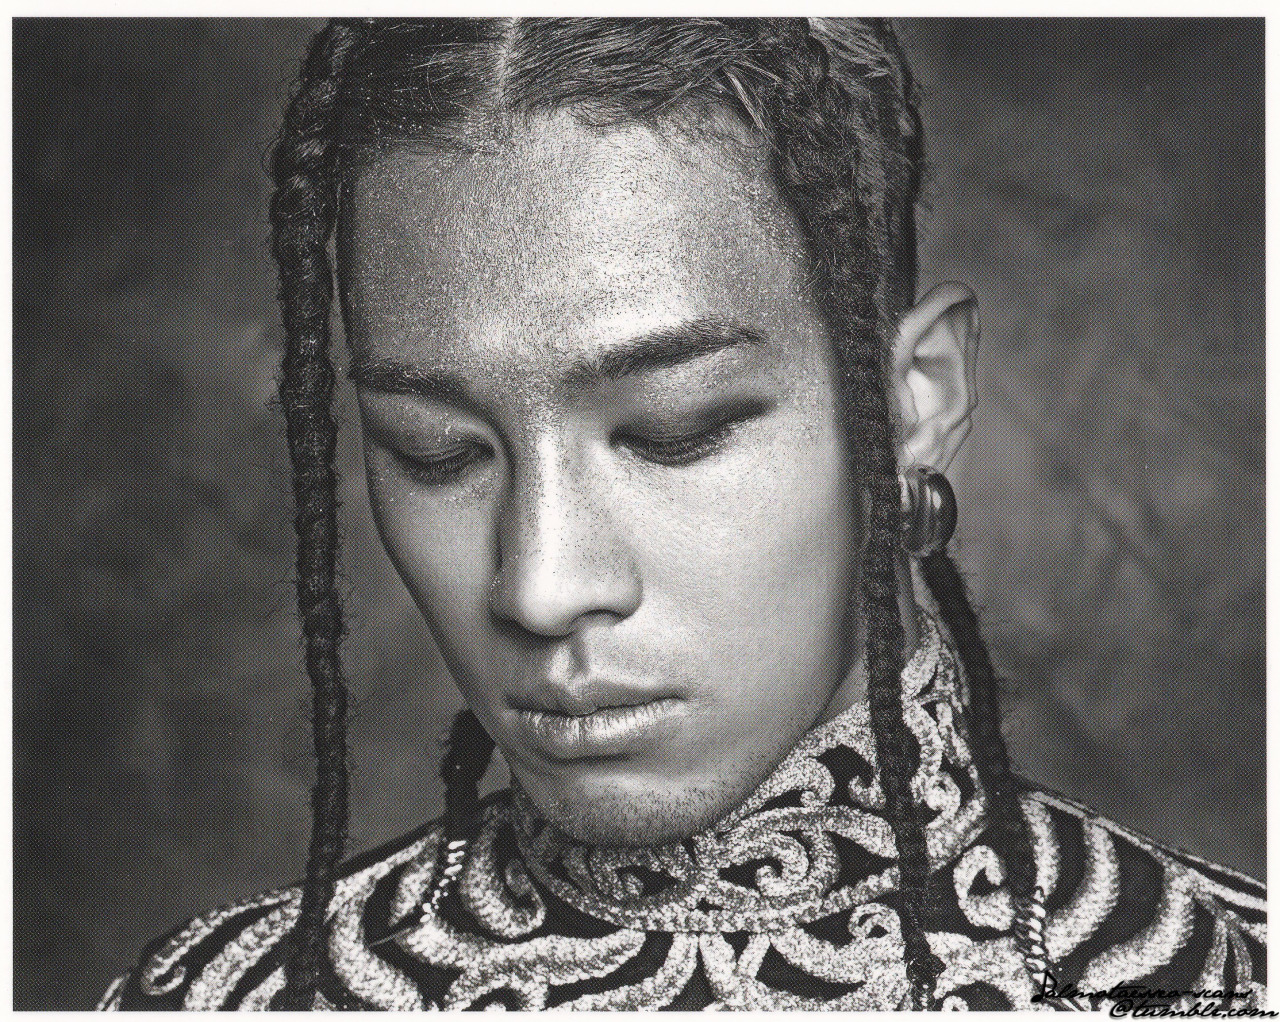 {HQ Scan} TaeYang’s RISE + best collection Vinyl LP photos -18- 
credit&#160;: jalmotaesseo-scans if editing! Do not repost without permission! Do not post to weheartit!